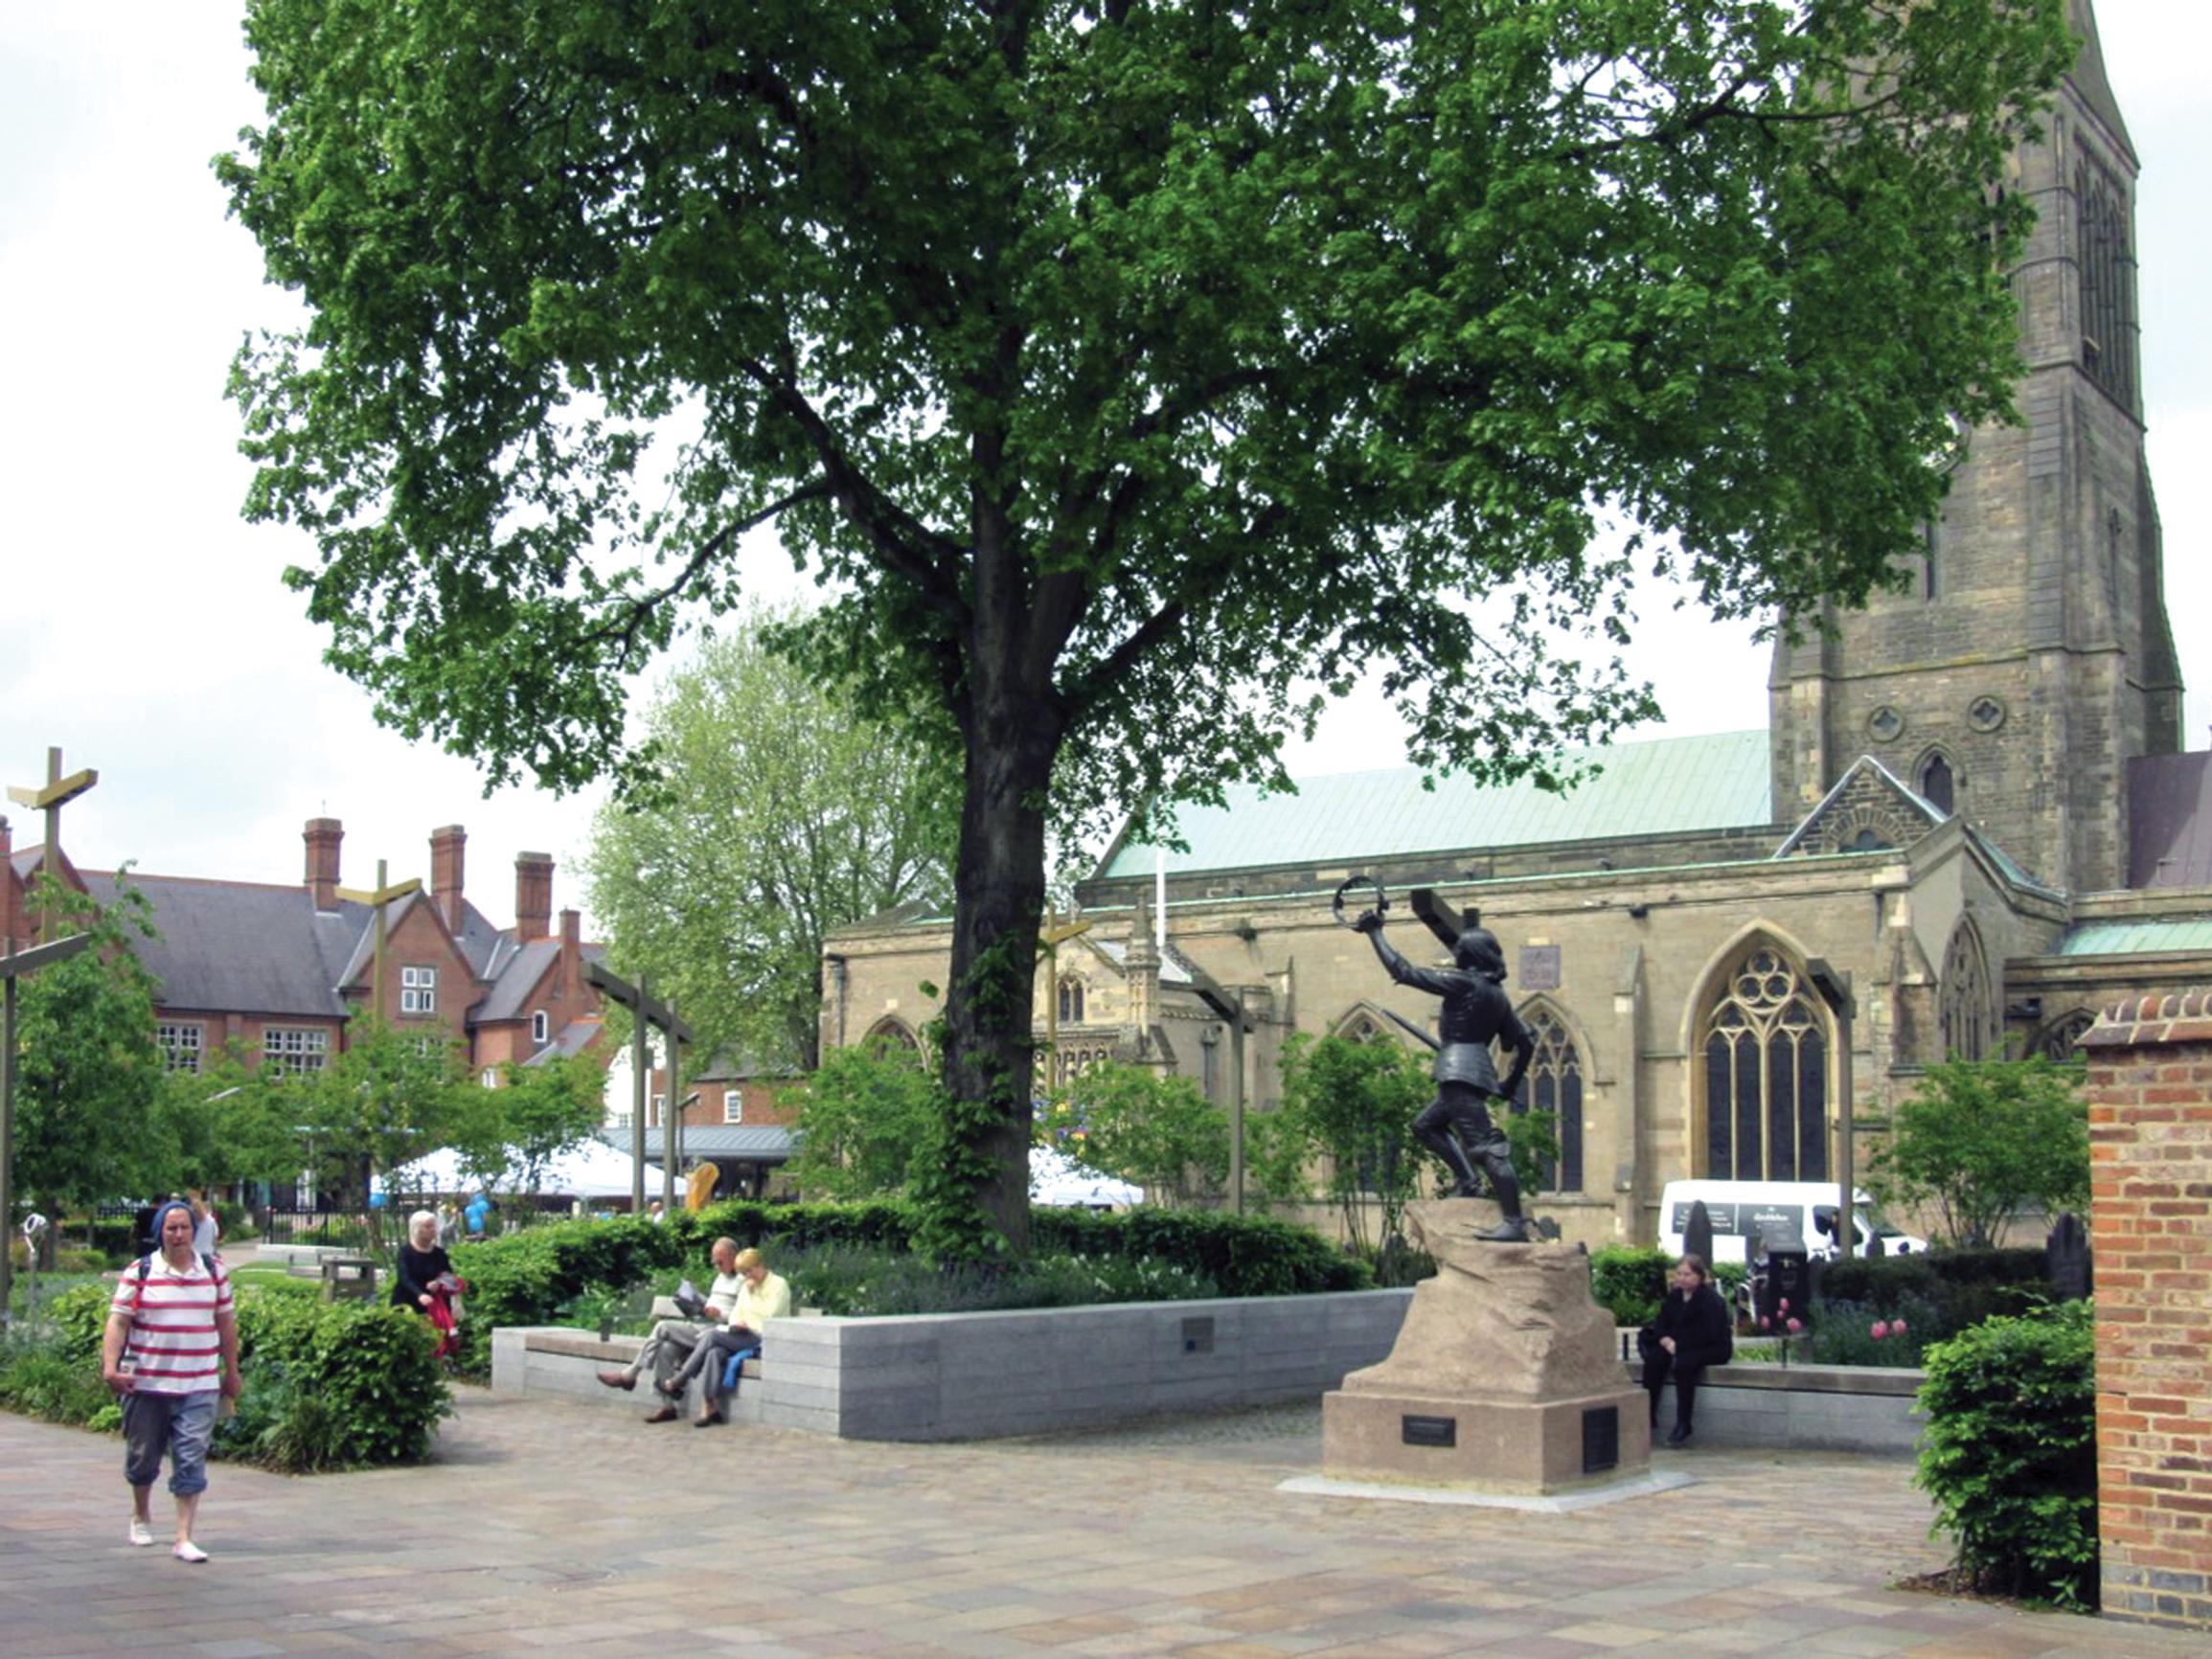 Cathedral Gardens, Leicester: featuring Richard III on a plinth and a spin class under gazebos!